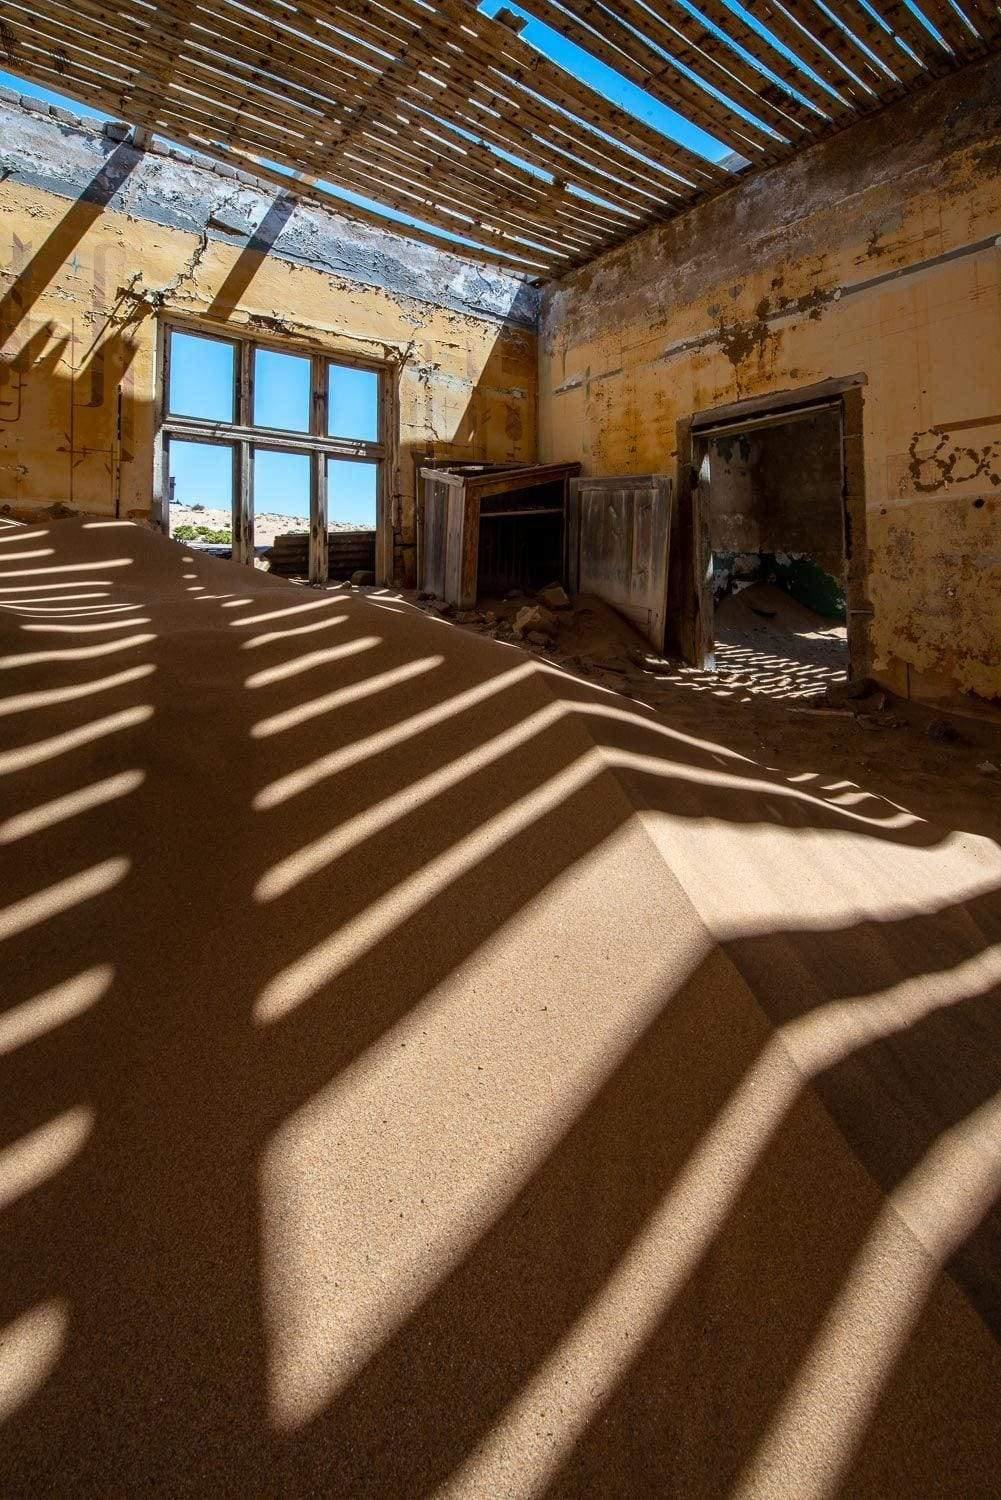 Making of a house with no doors and windows, a lining effect of sunlight coming, Kolmanskop #33